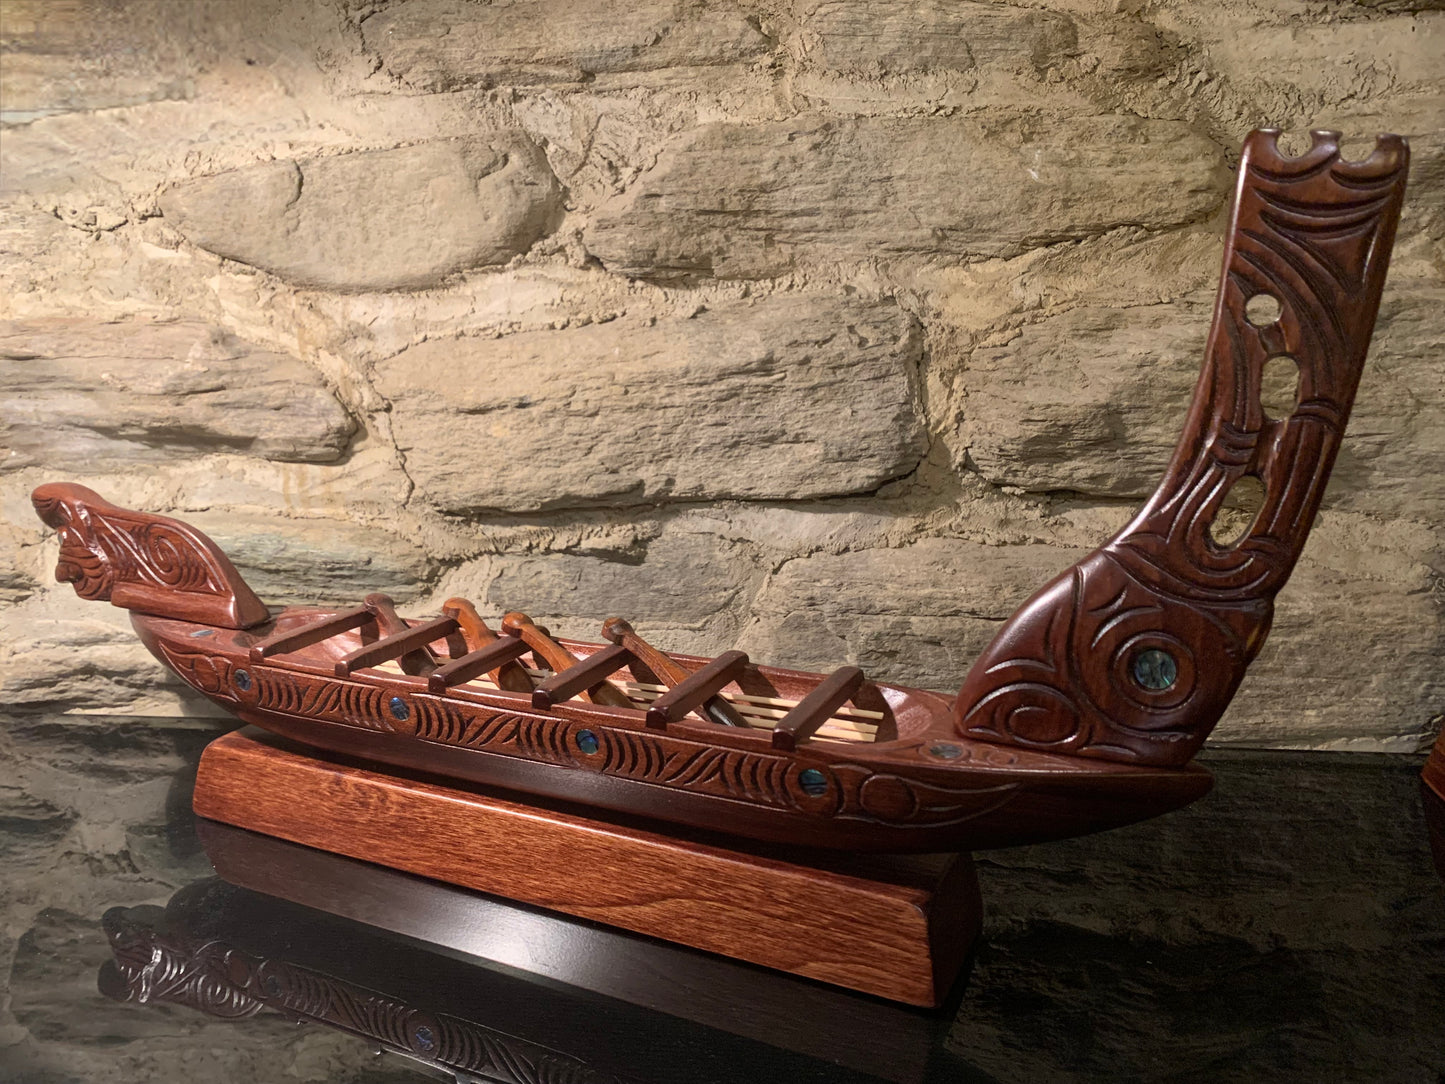 Maori small waka canoe carved in New Zealand and available from Silver Fern Gallery